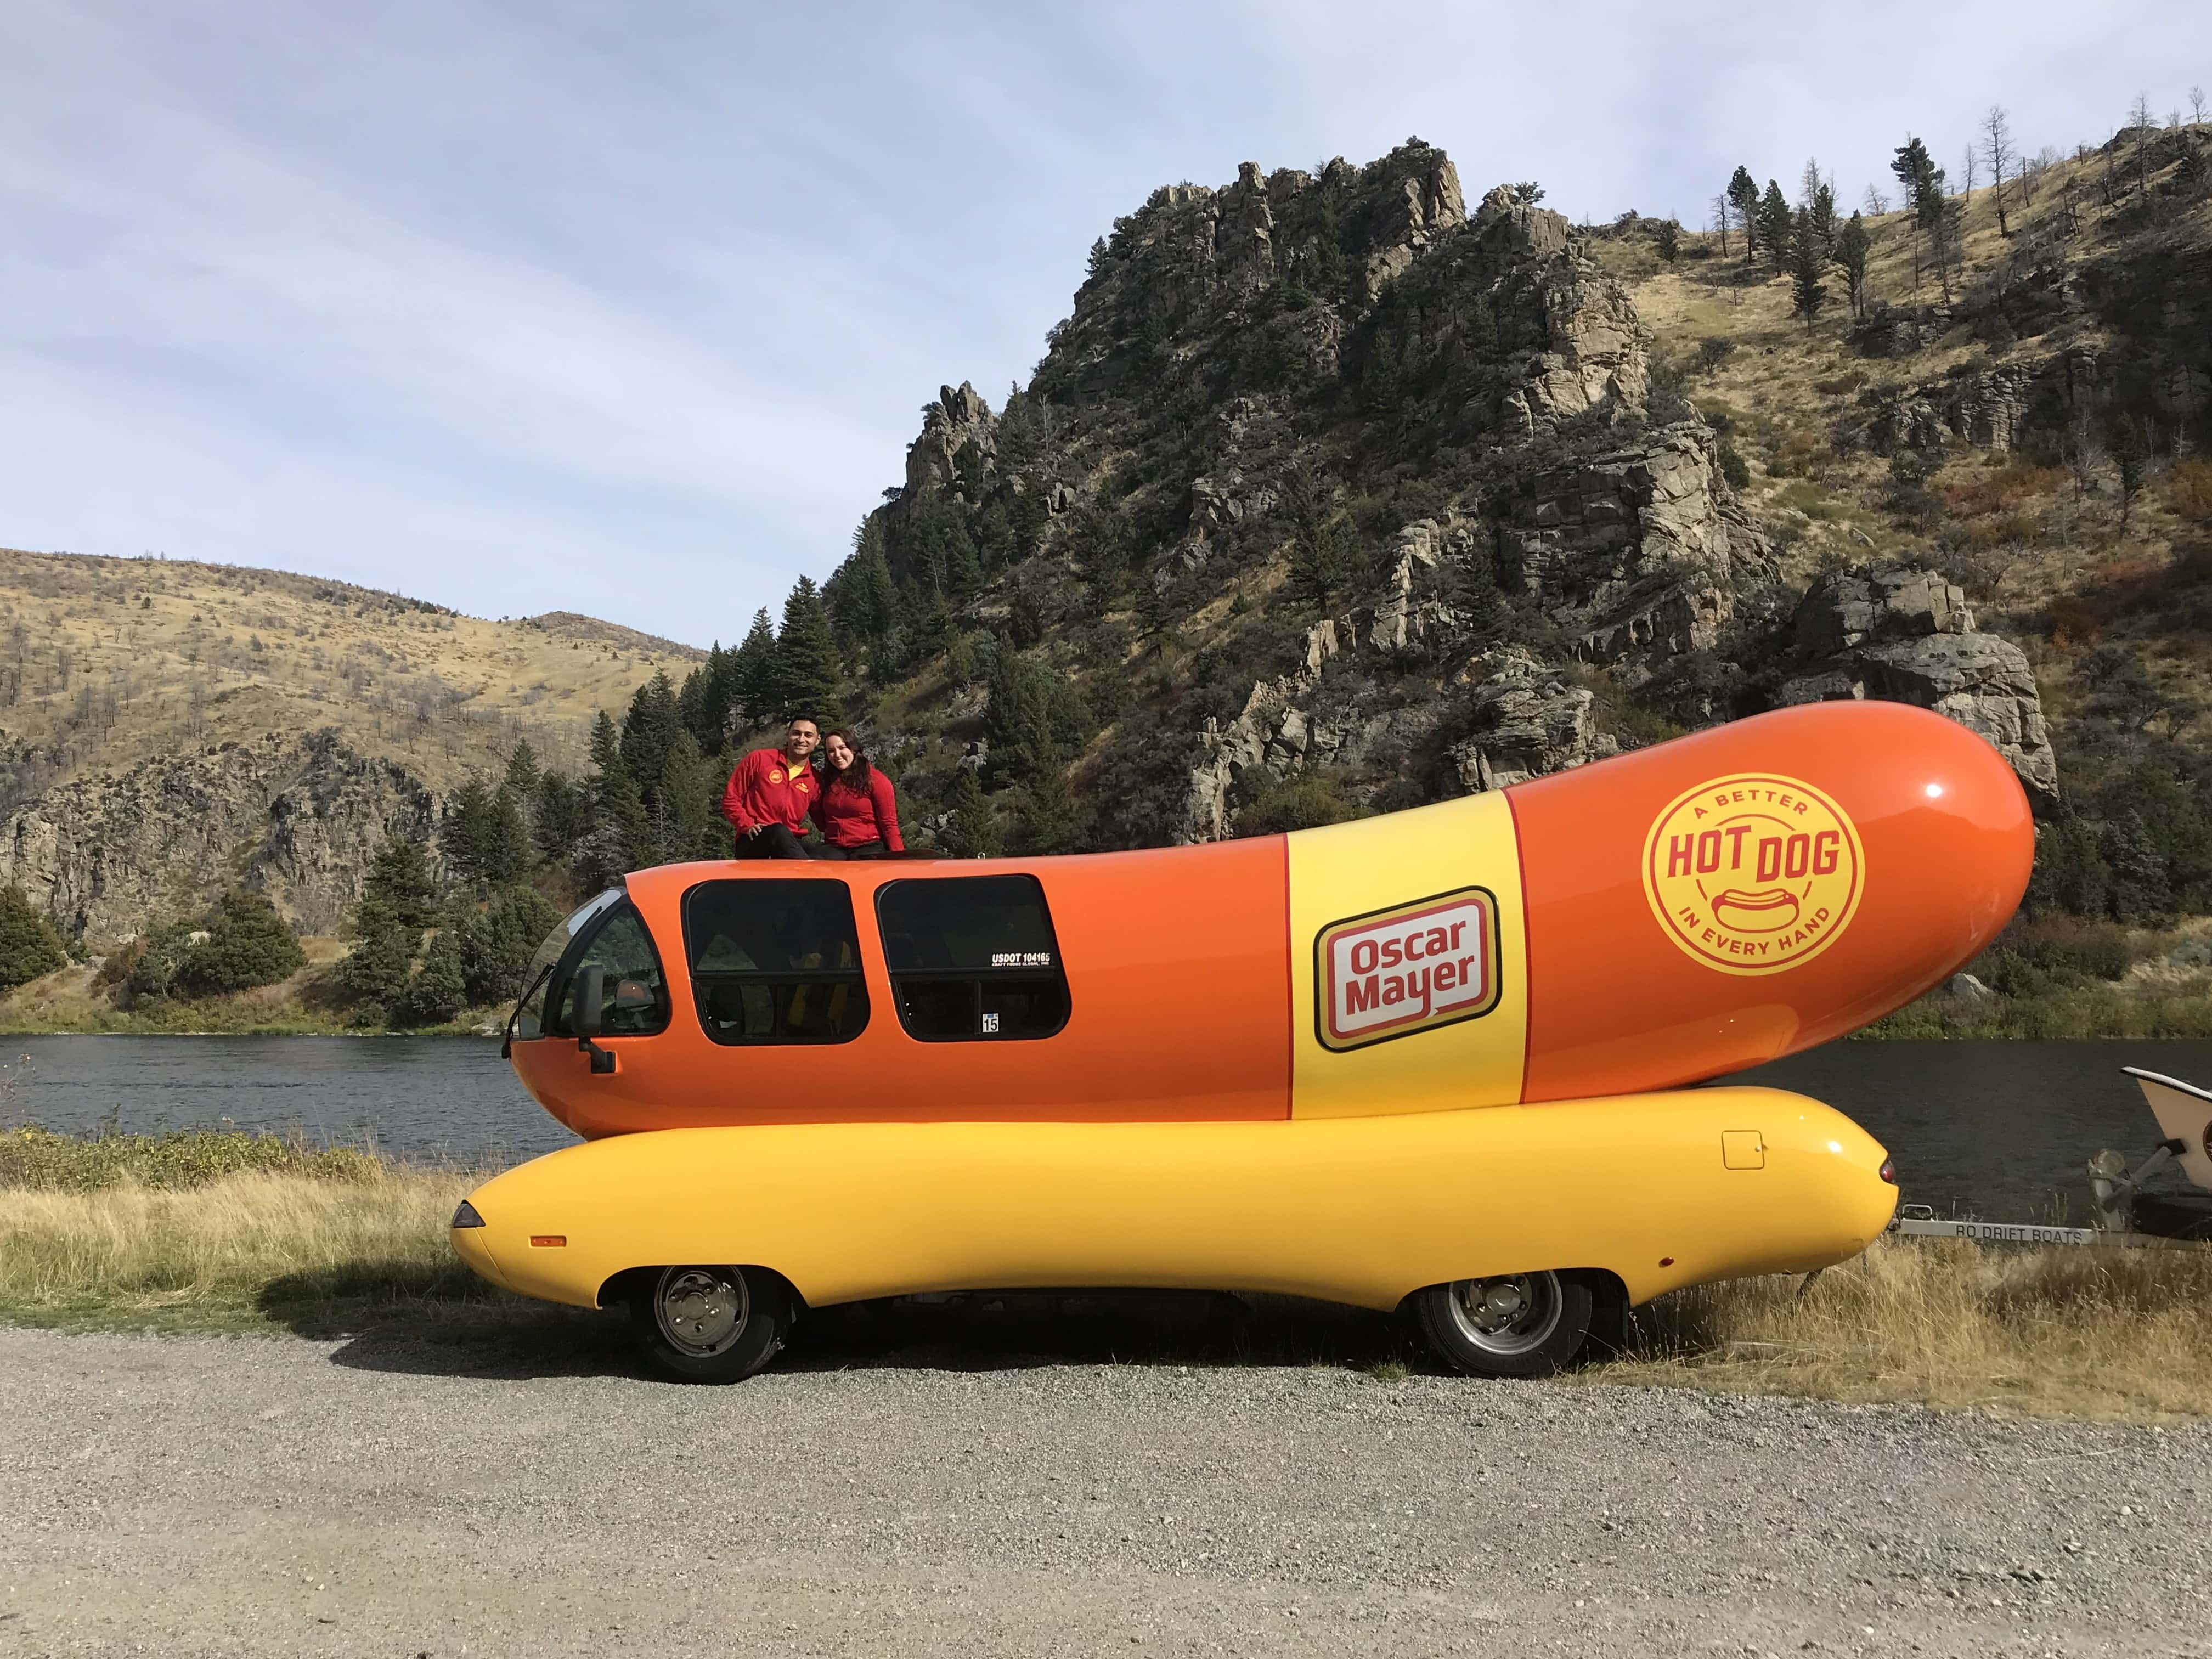 Wienermobile To Make Stop In Indianapolis - 93.1FM WIBC